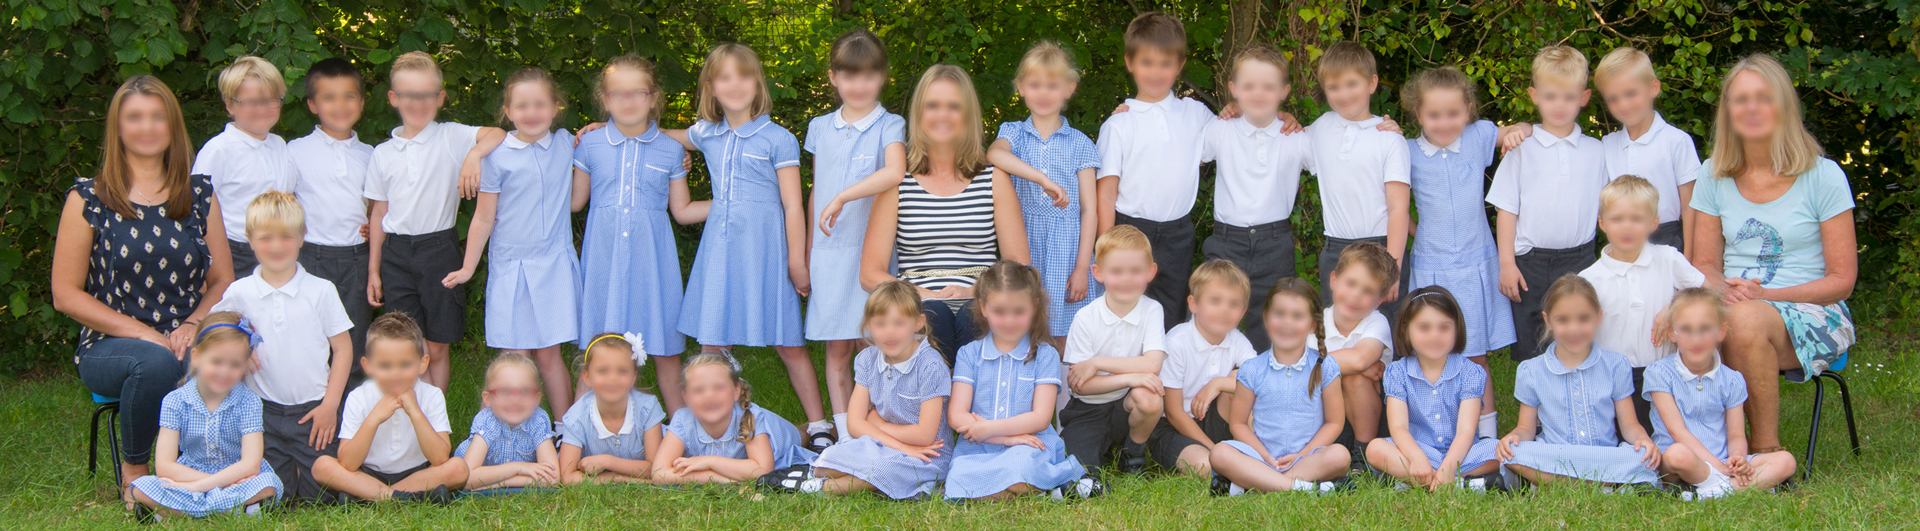 Primary School Photography Full Banner